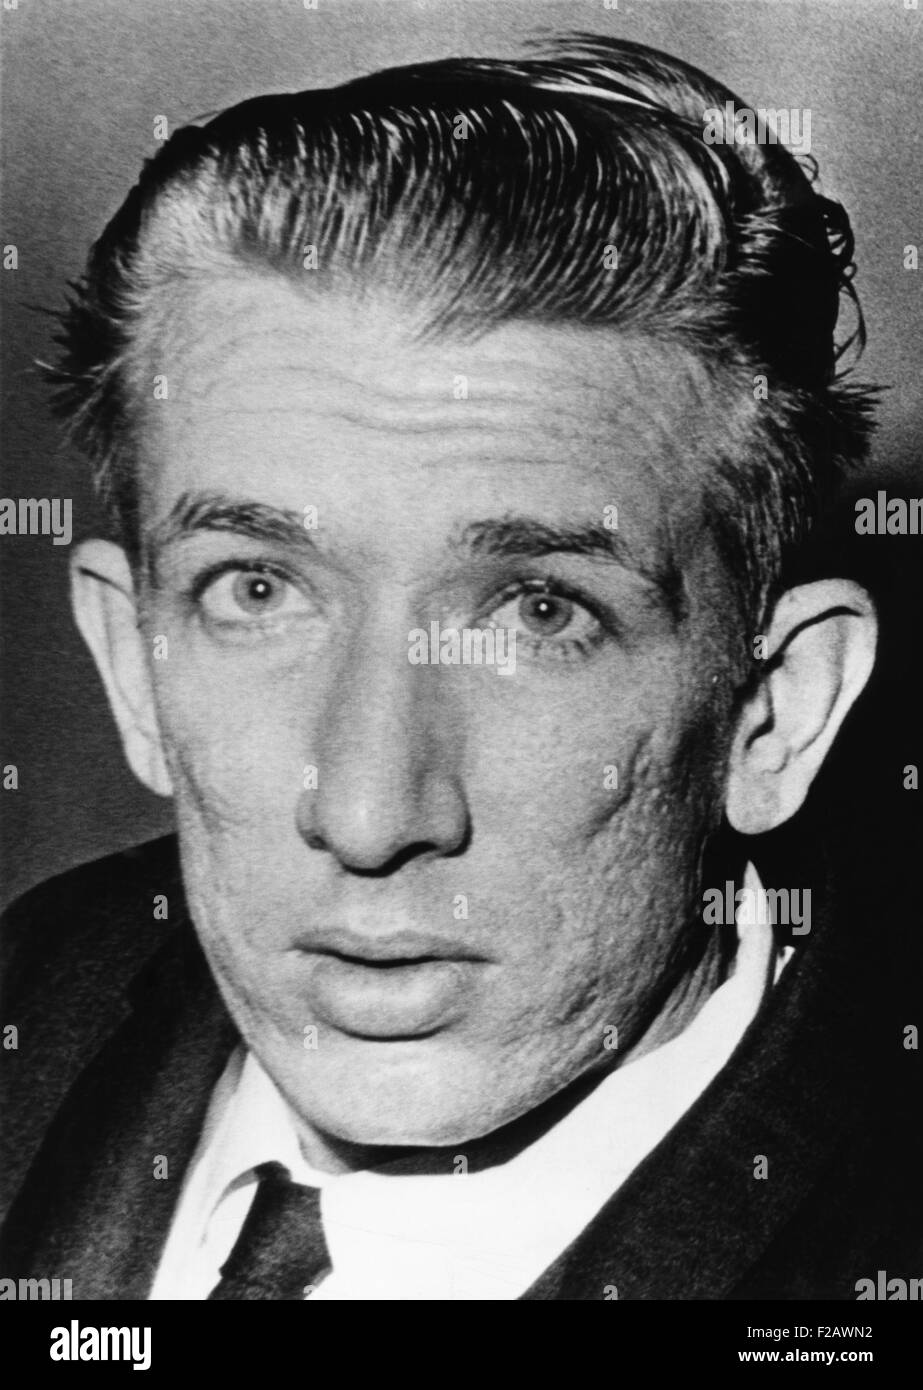 Richard Speck, 24, accused slayer of eight student nurses, in Chicago court ...